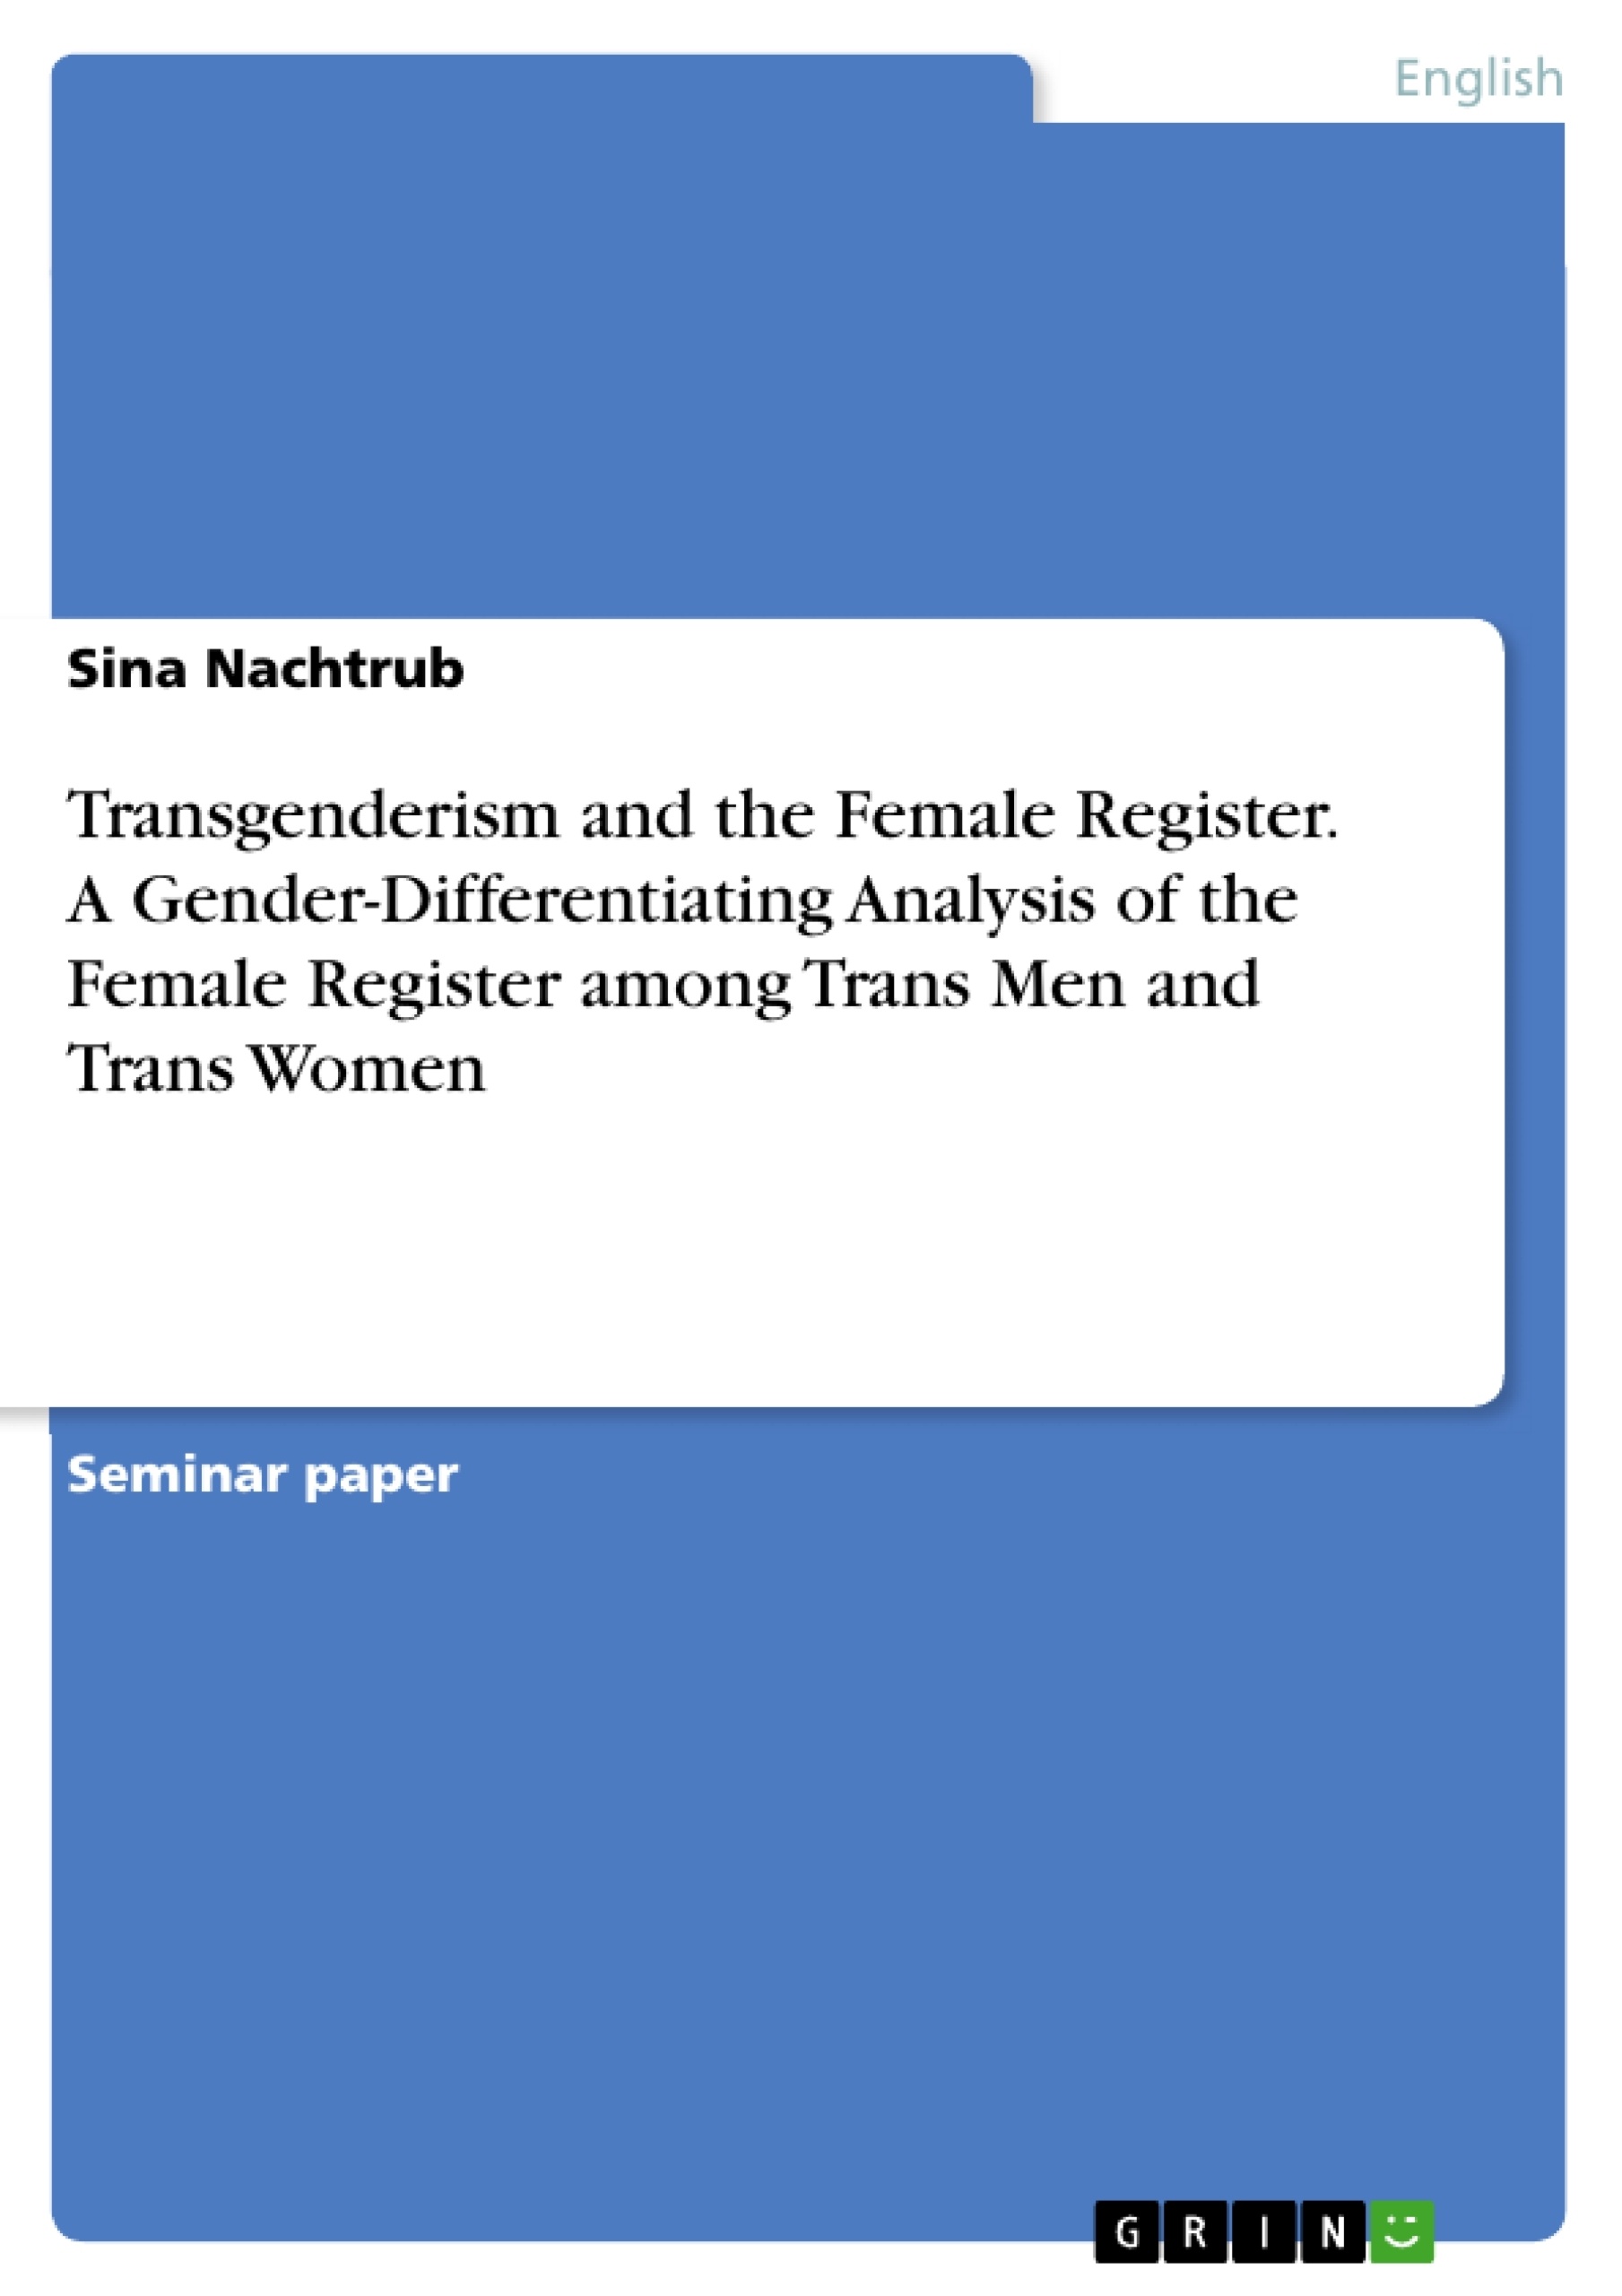 Título: Transgenderism and the Female Register. A Gender-Differentiating Analysis of the Female Register among Trans Men and Trans Women